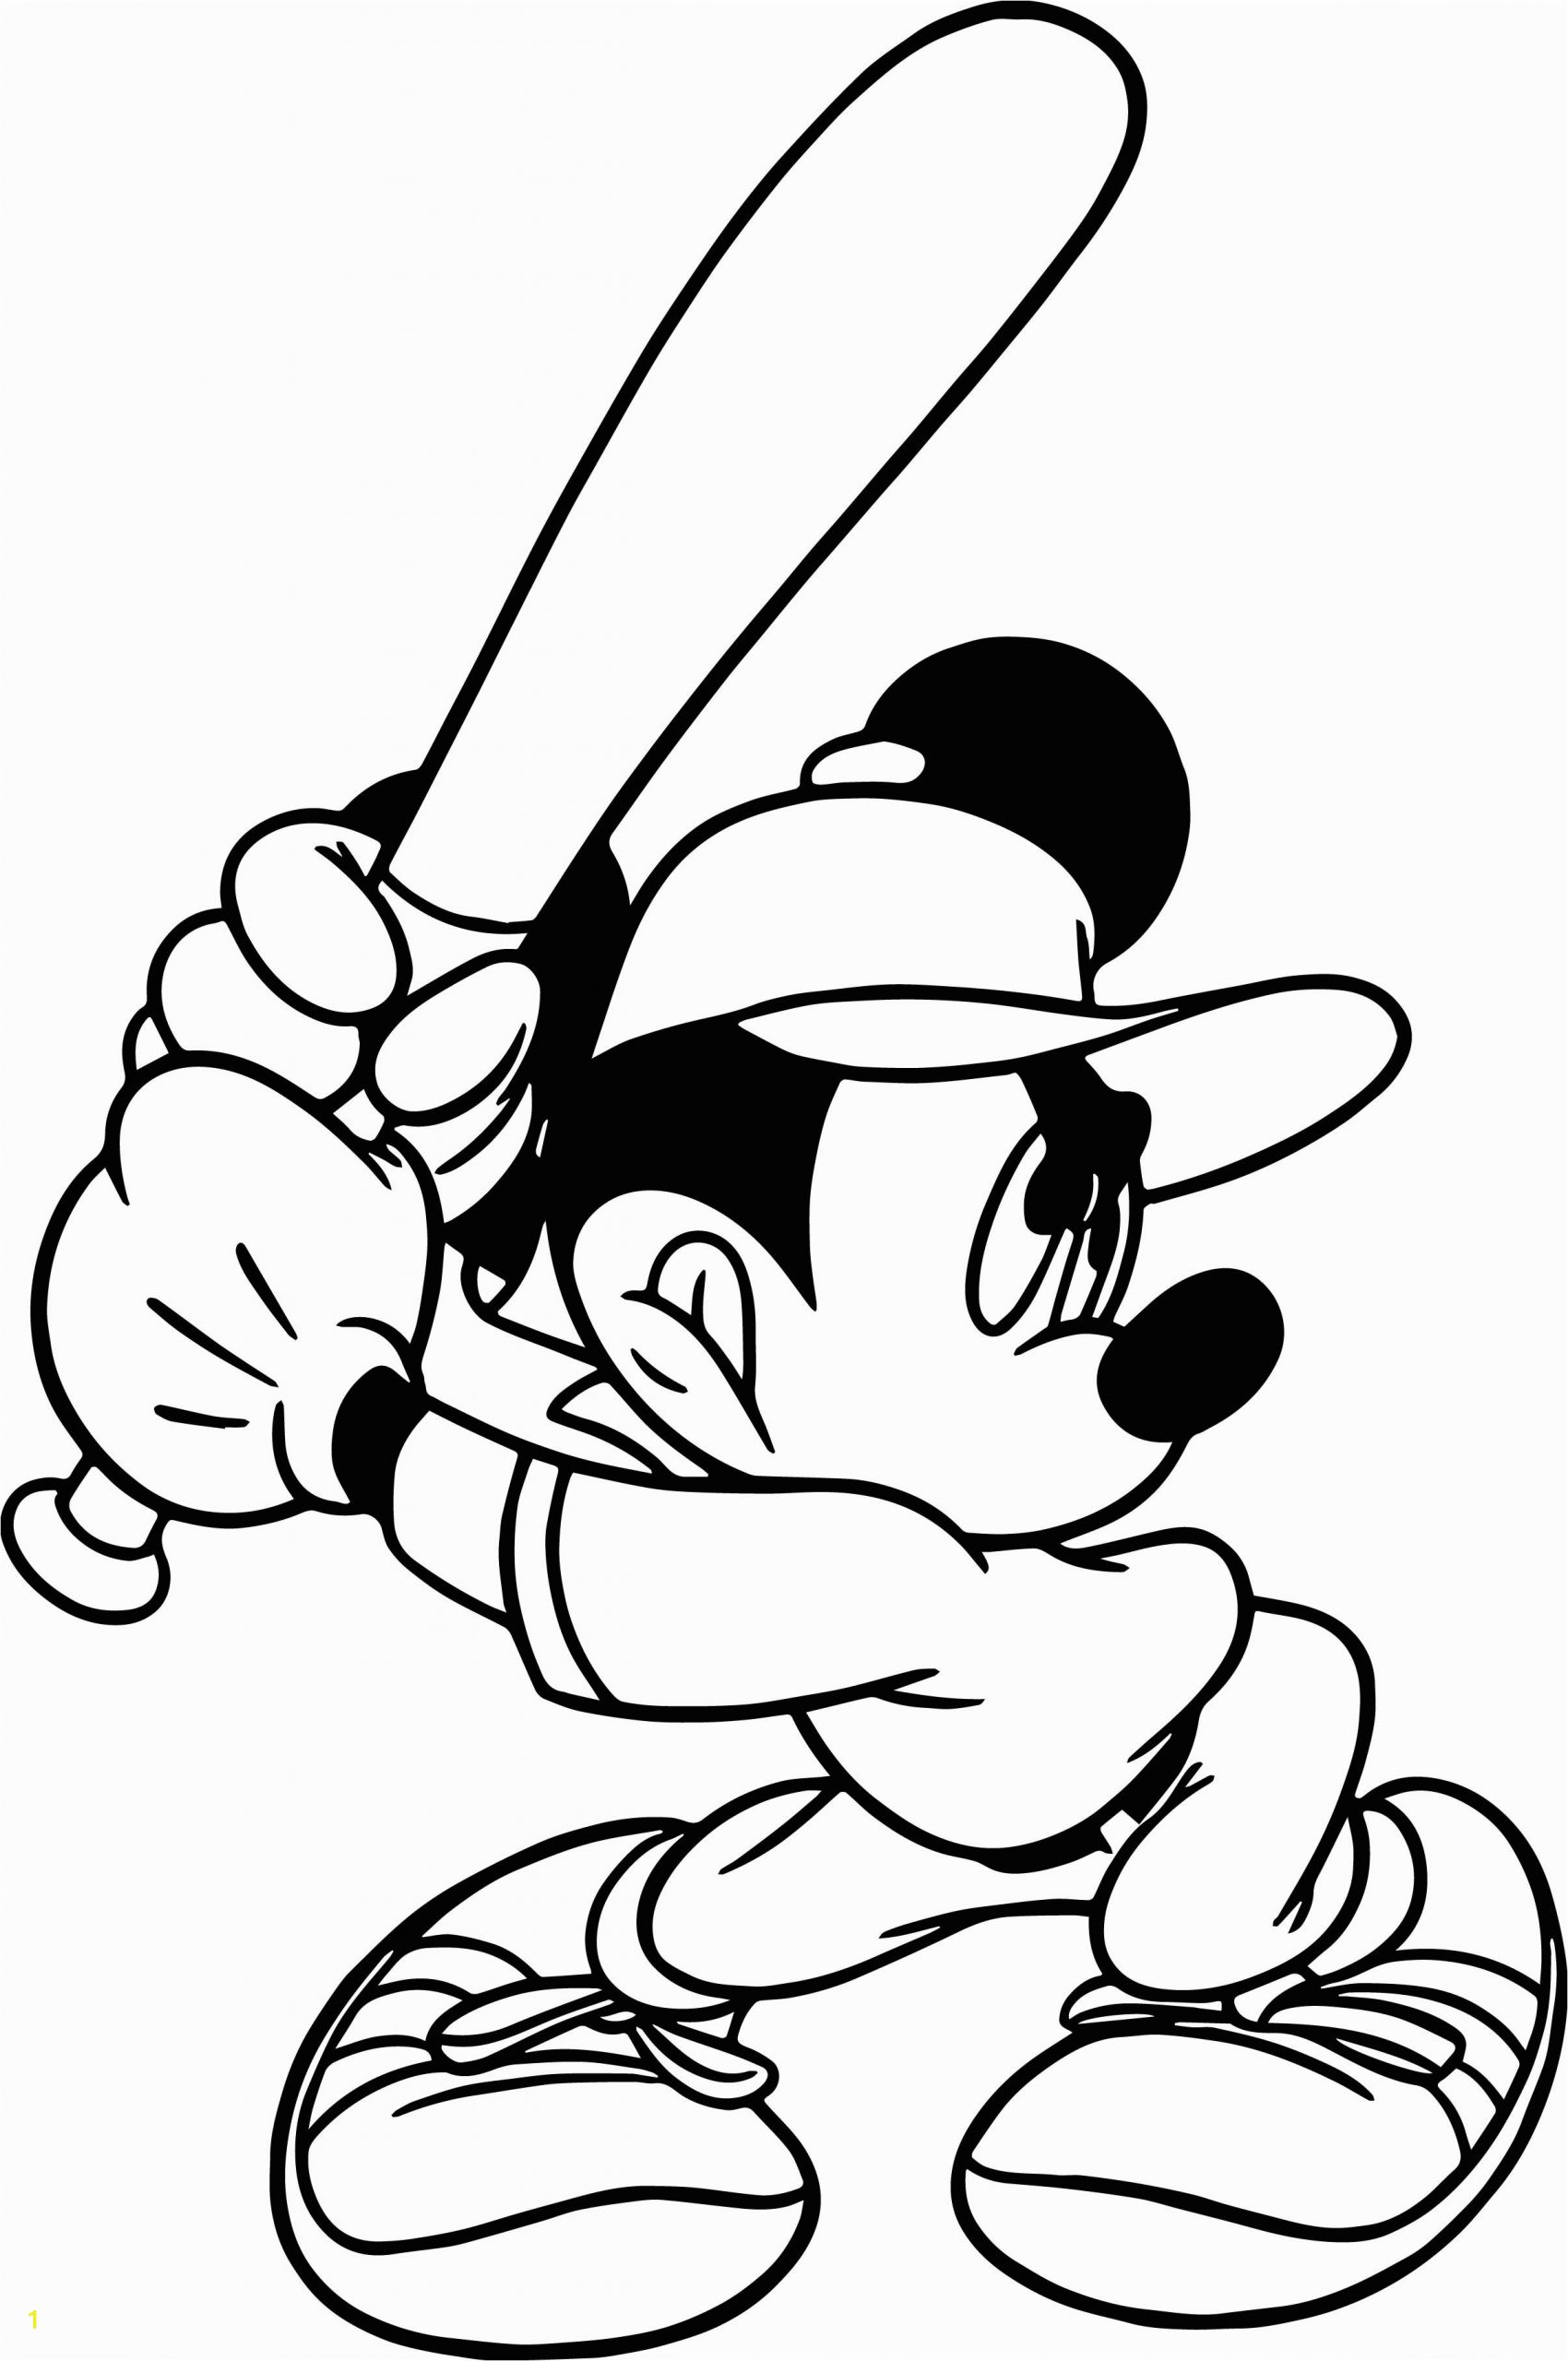 Mickey Mouse Playing Baseball Coloring Pages Mickey Playing Baseball Coloring Page